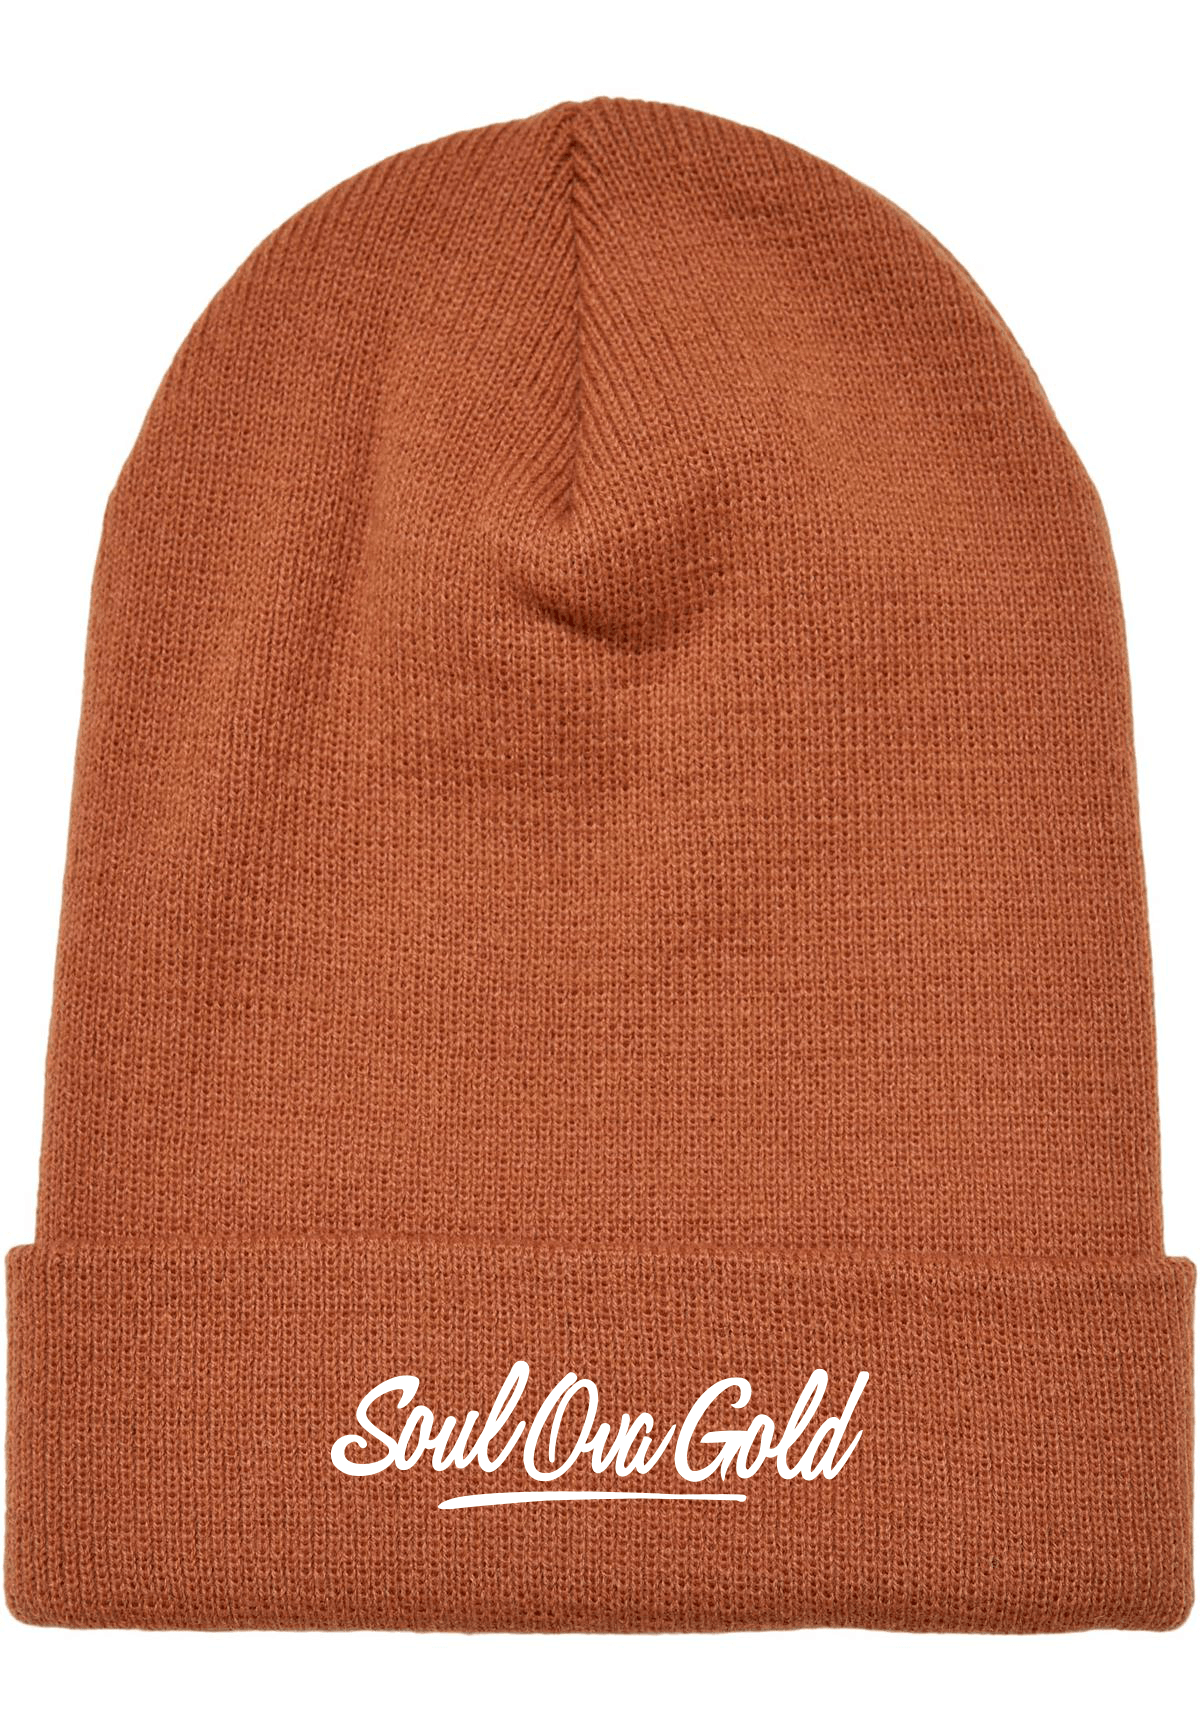 Soul Ova Gold Beanies Stick 2 The Script Embroidered Beanie (Toffee)